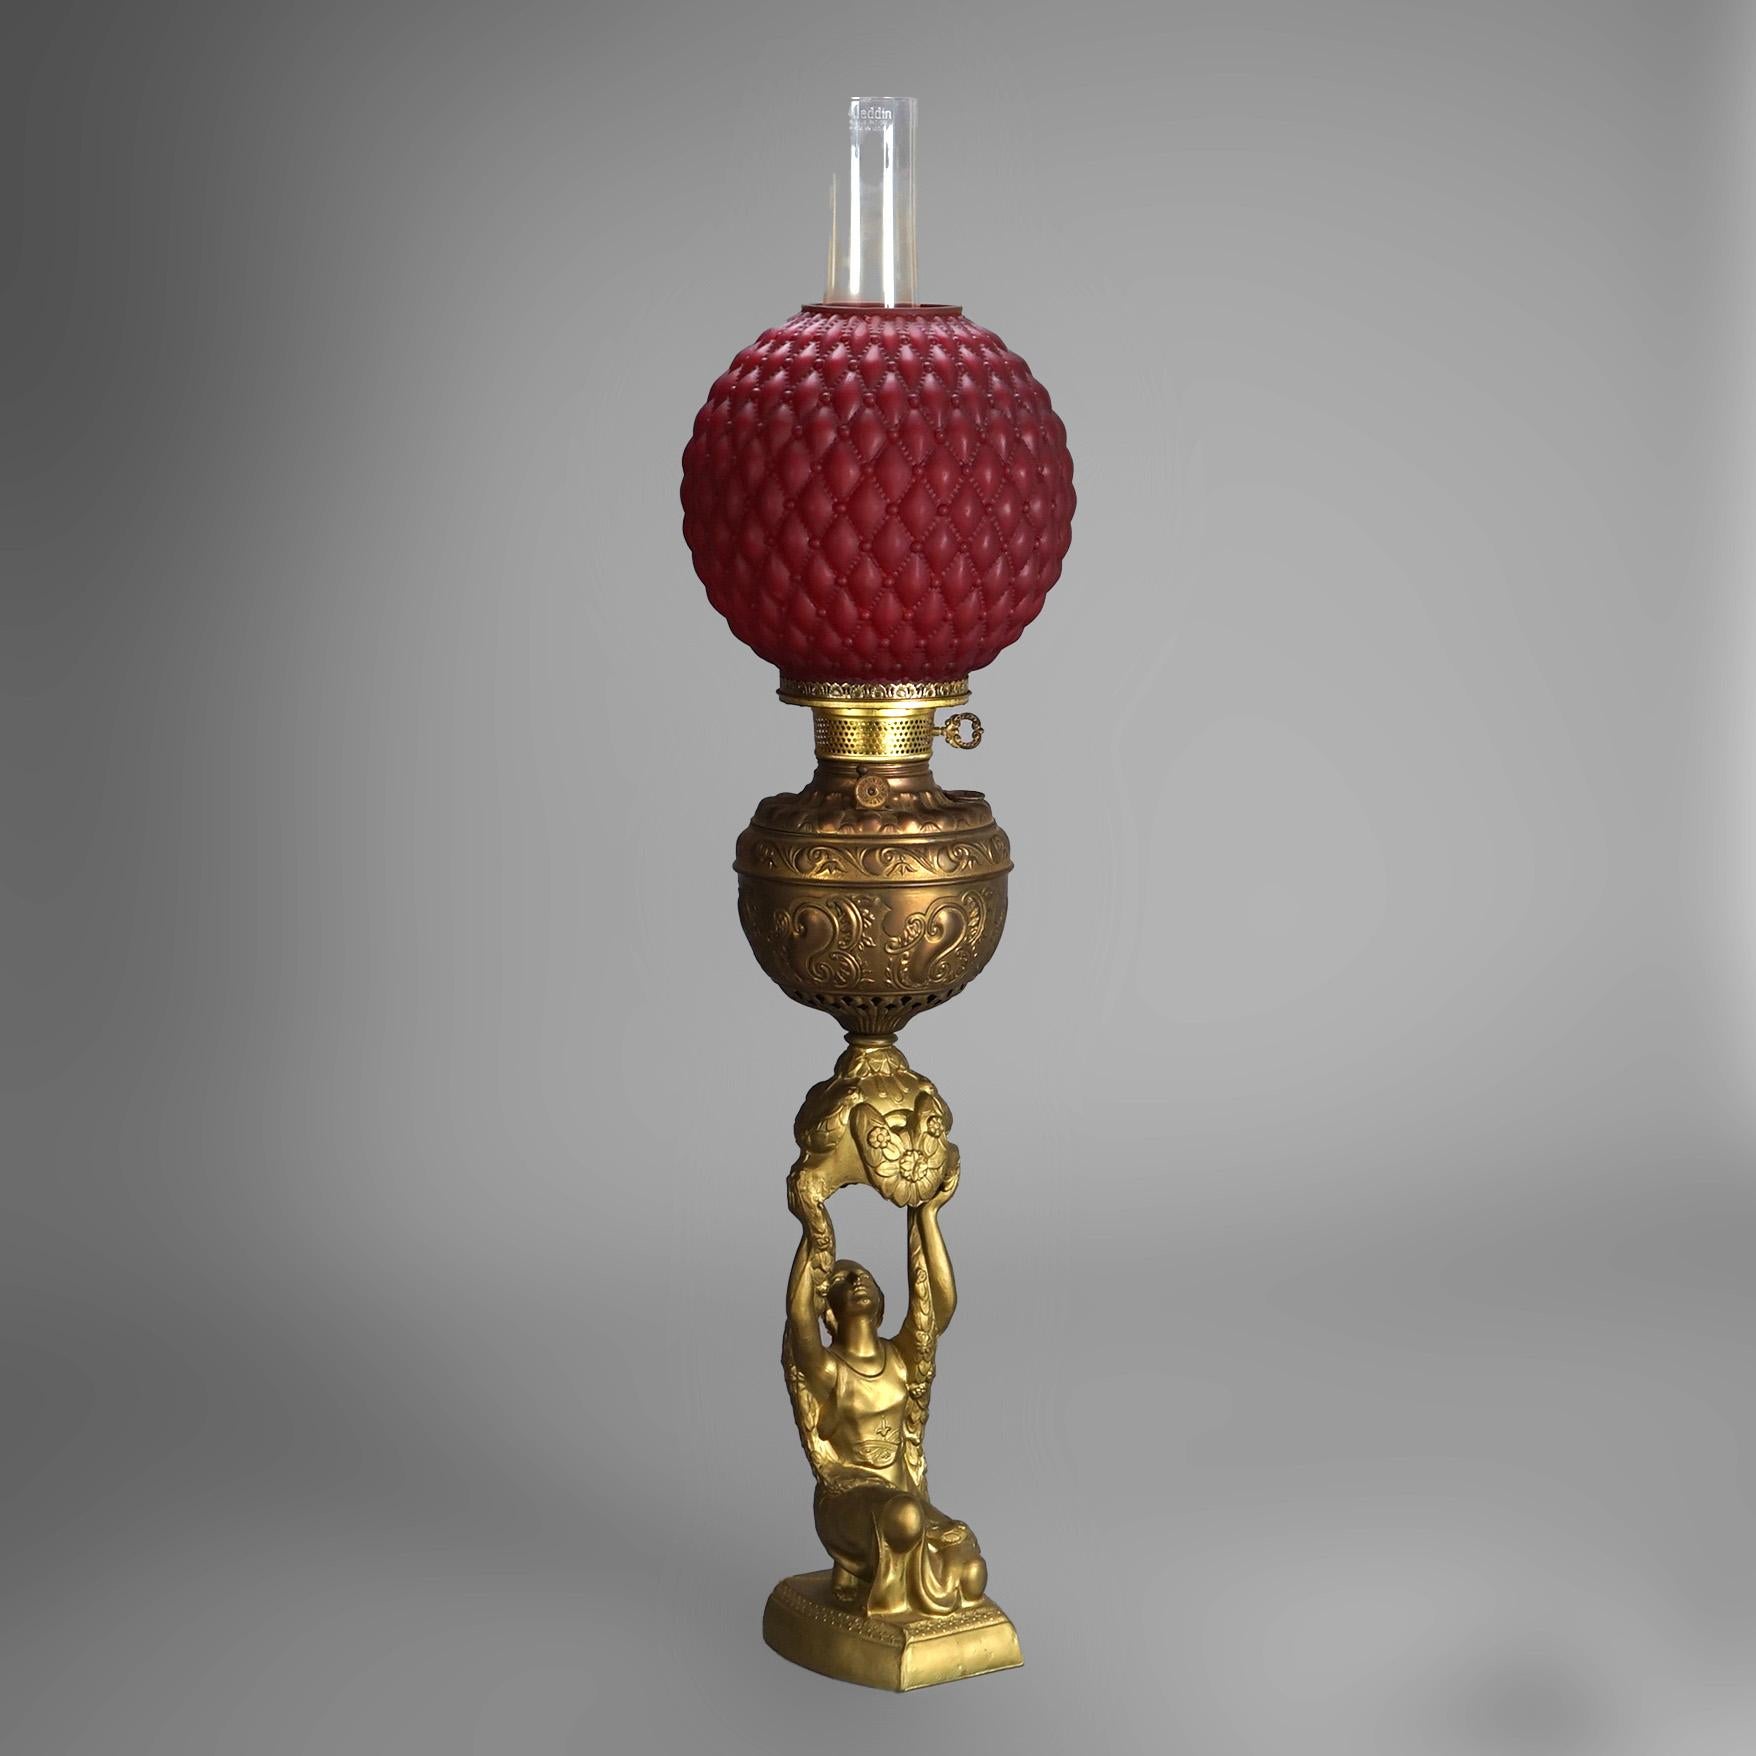 An antique figural parlor lamp offers quilted ruby satin glass shade over gilt cast metal base having a foliate embossed font and kneeling woman, electrified, c1900

Measures - 34.5